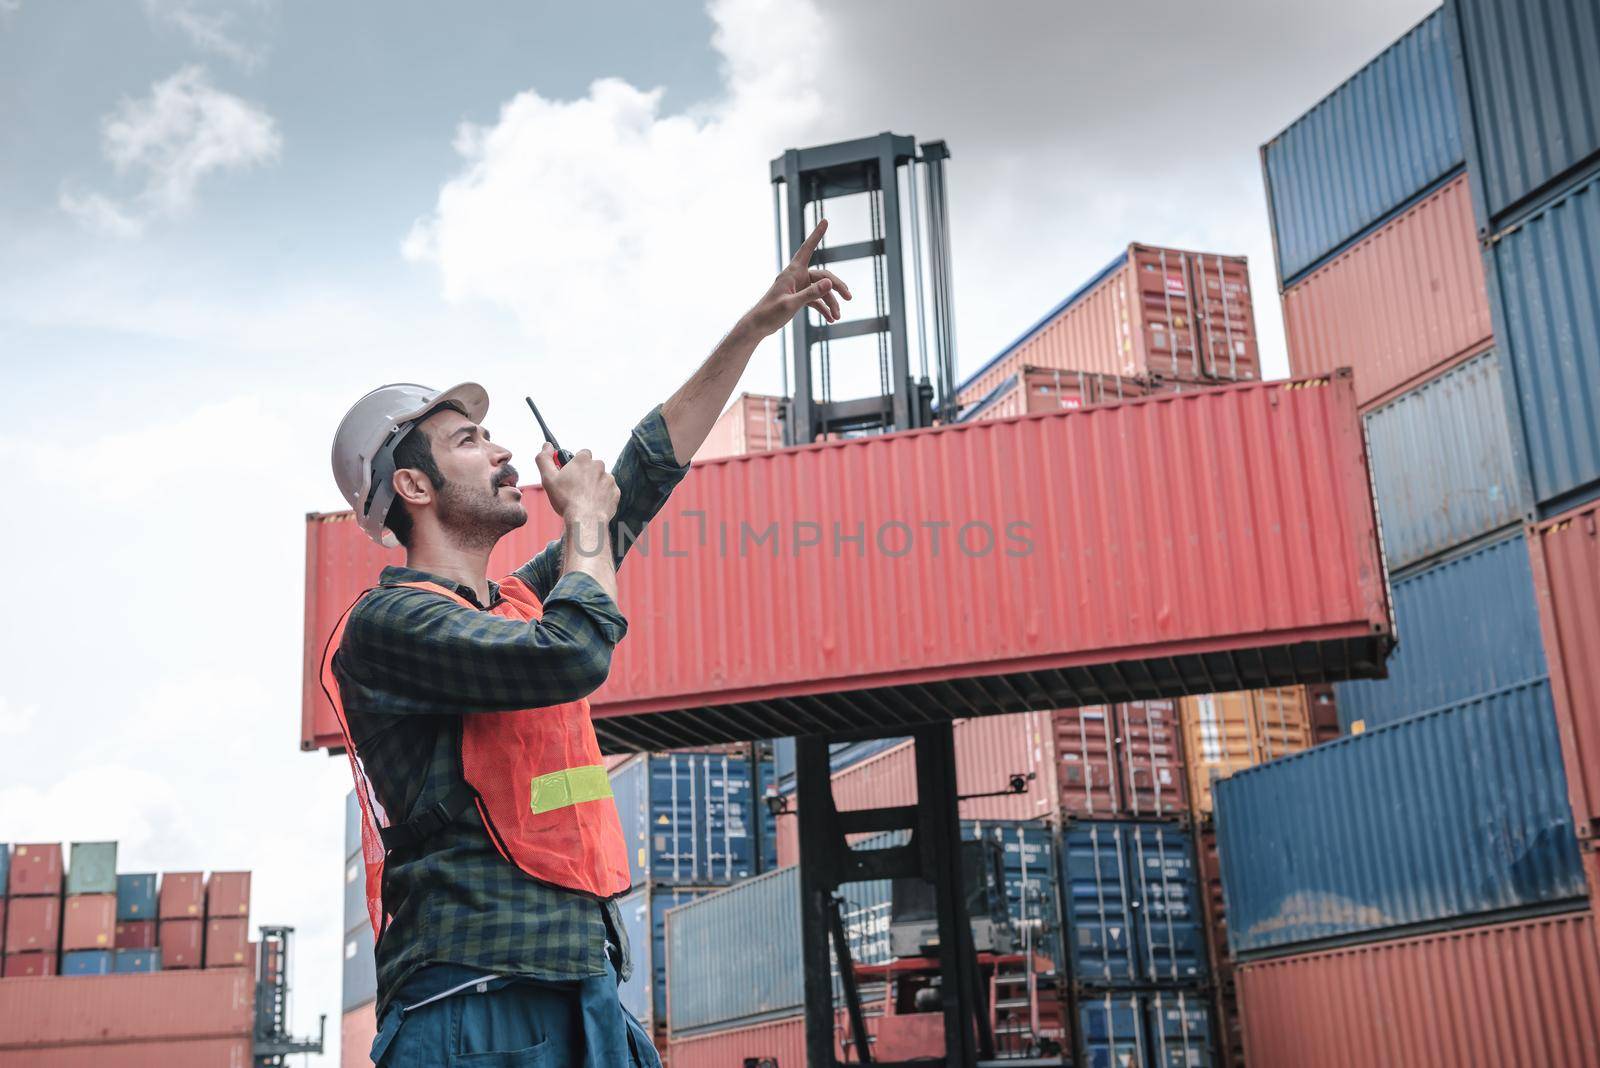 Transport Container Engineer Managing Control Via Walkie Talkie in Containers Shipyard. Container Logistics Shipping Management of Transportation Industry, Business Cargo Ship Import/Export Factory by MahaHeang245789